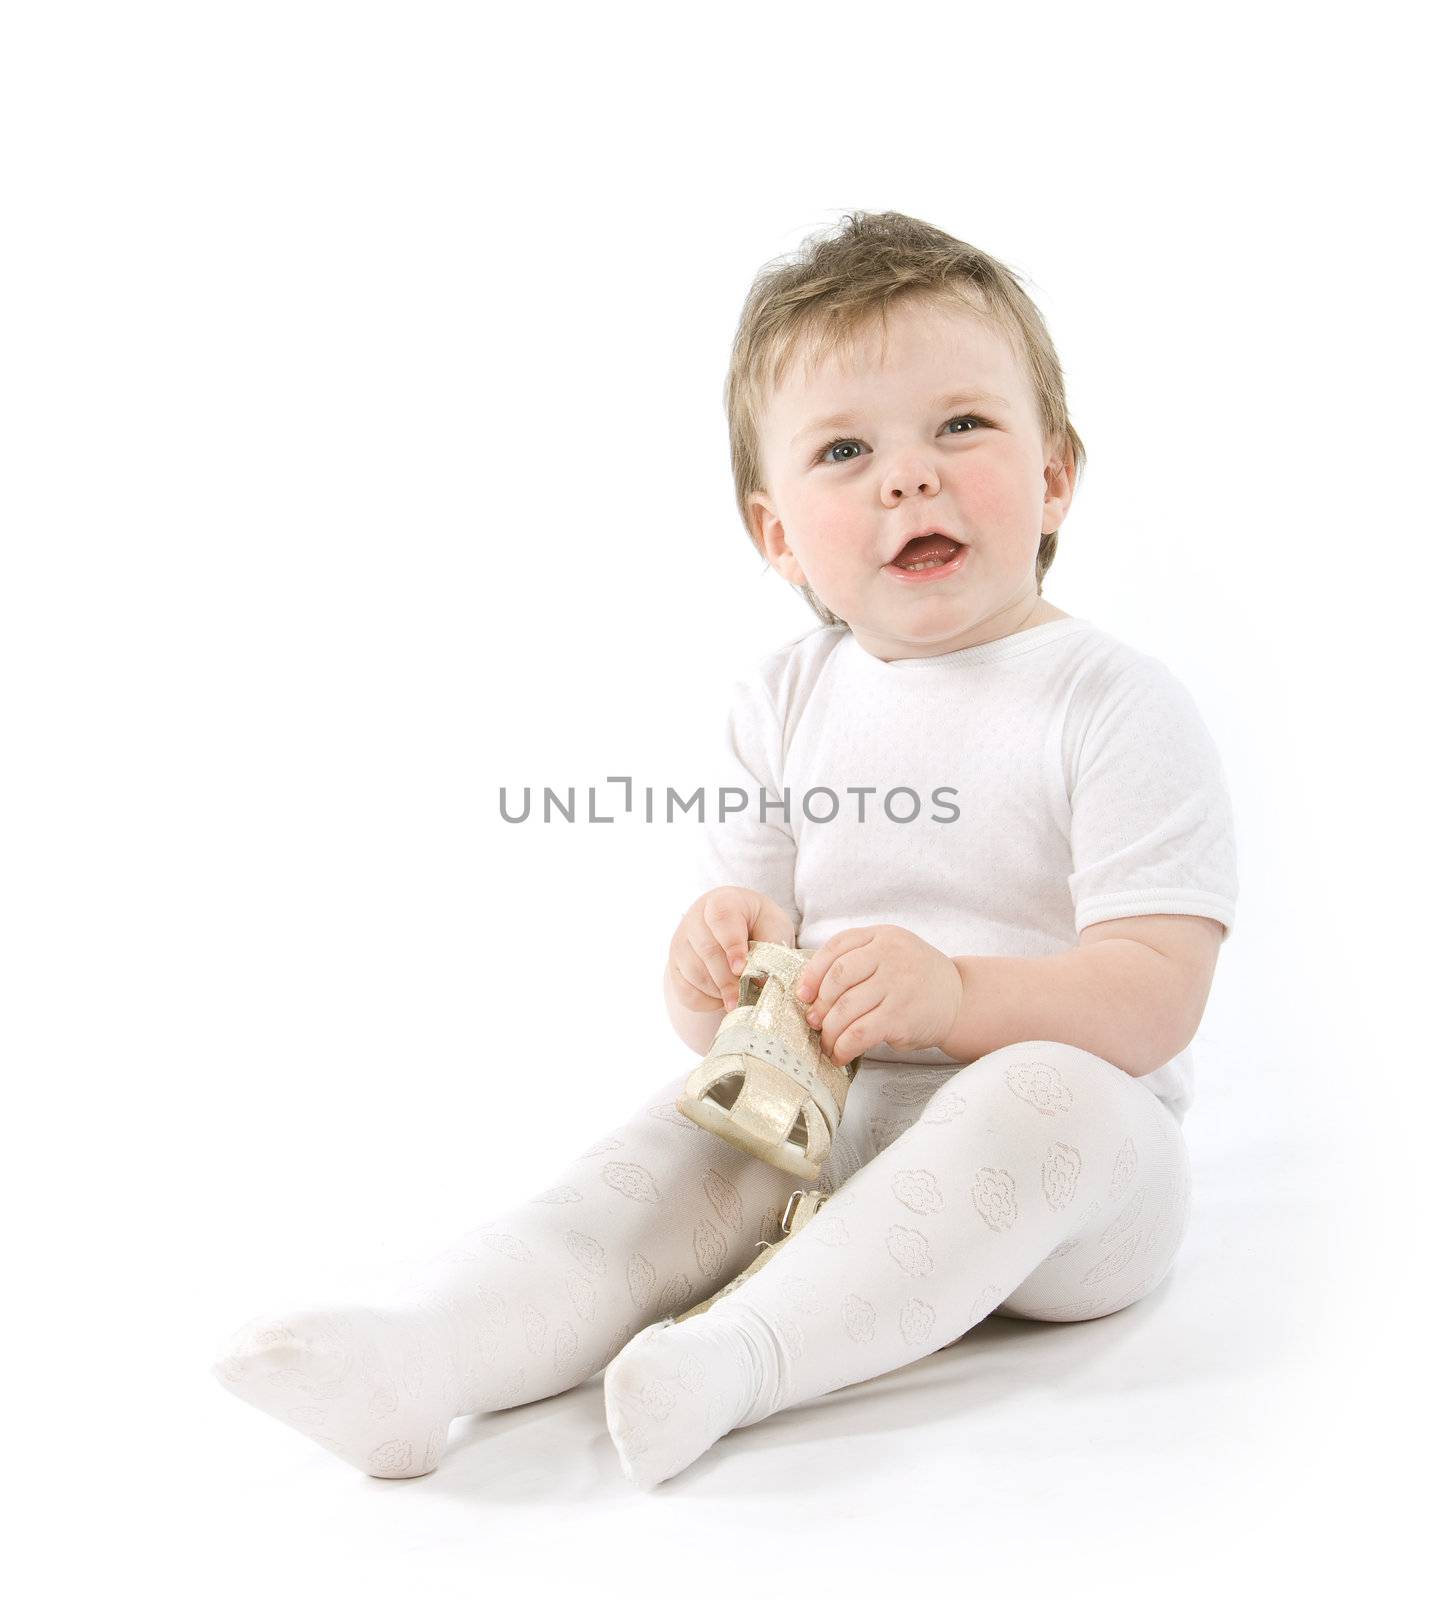 Child with shoes sitting. Isolated on white